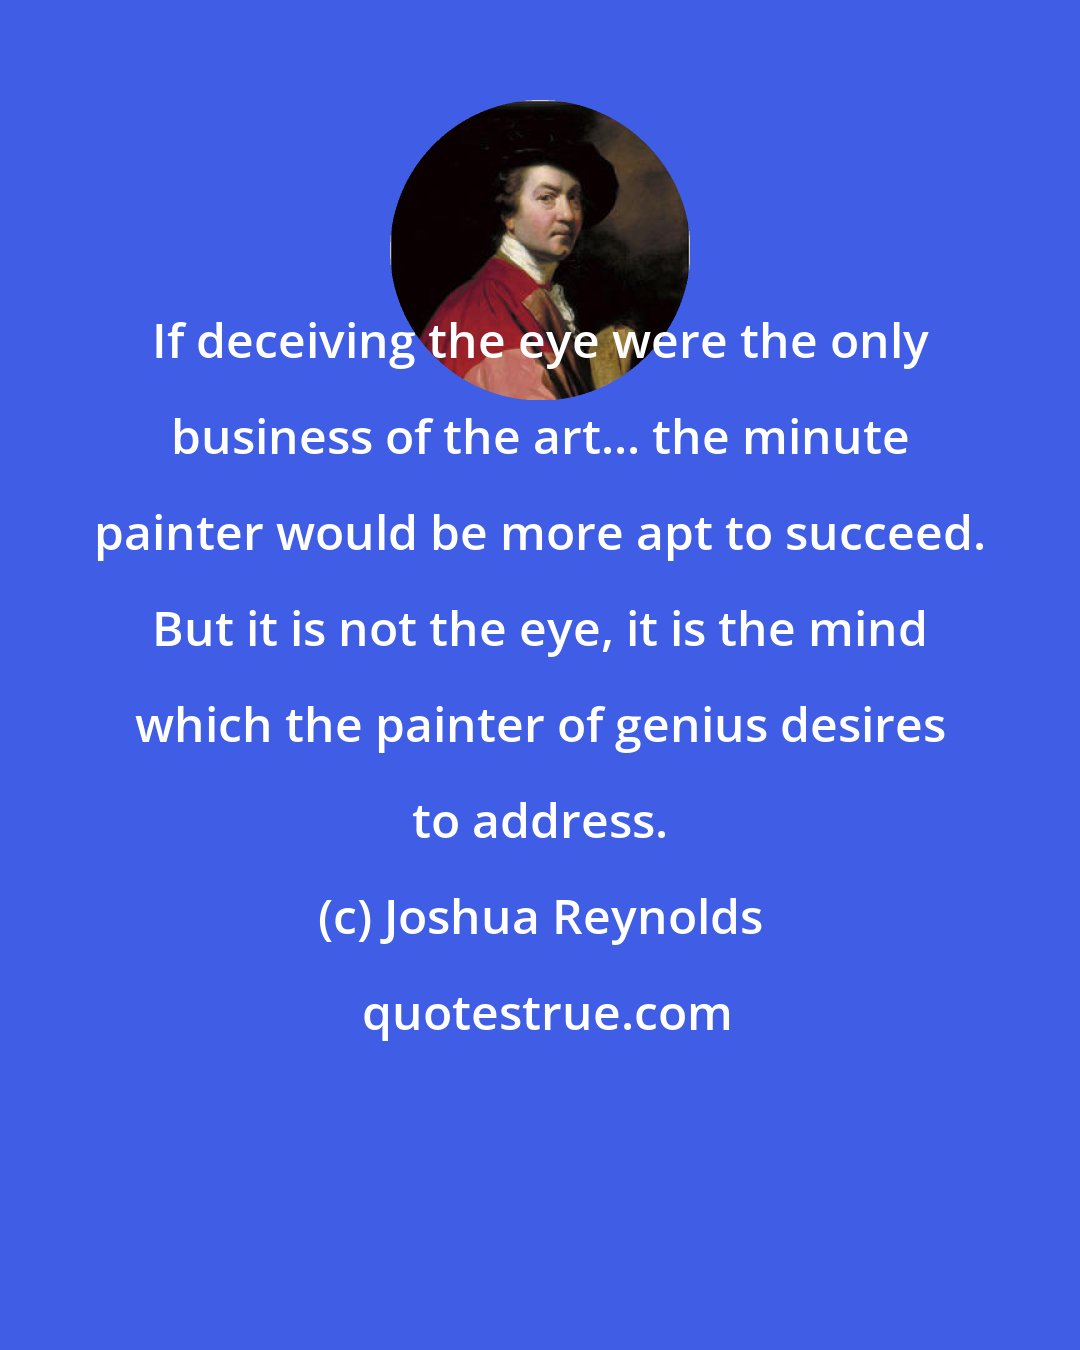 Joshua Reynolds: If deceiving the eye were the only business of the art... the minute painter would be more apt to succeed. But it is not the eye, it is the mind which the painter of genius desires to address.